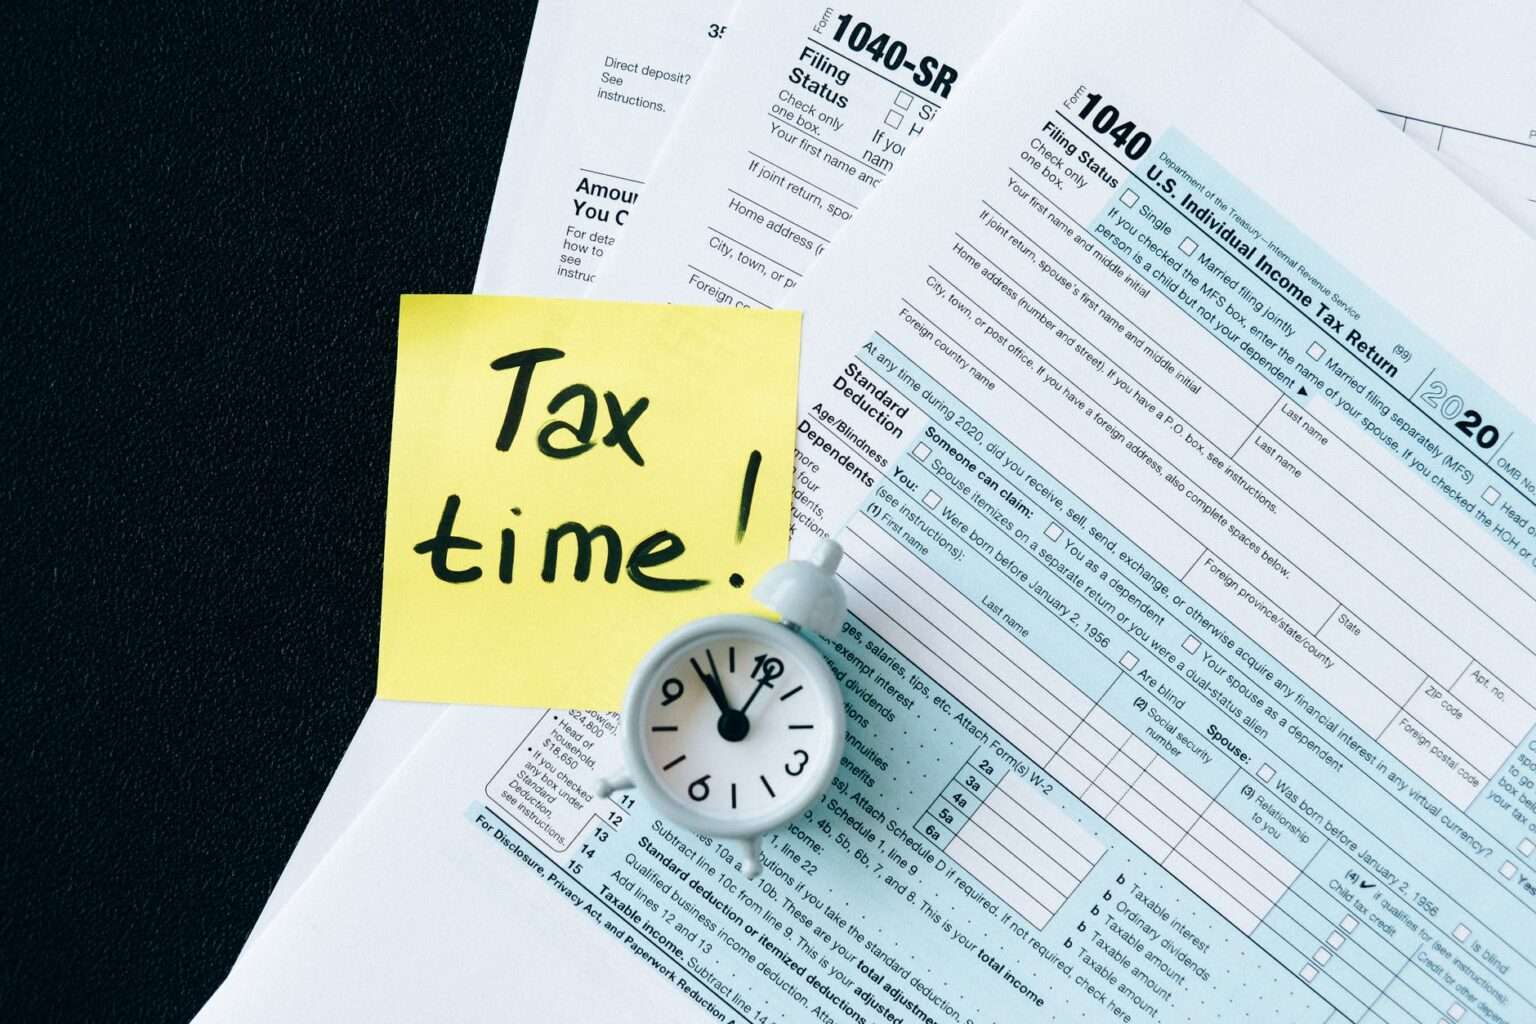 Income tax due dates for FY 2021